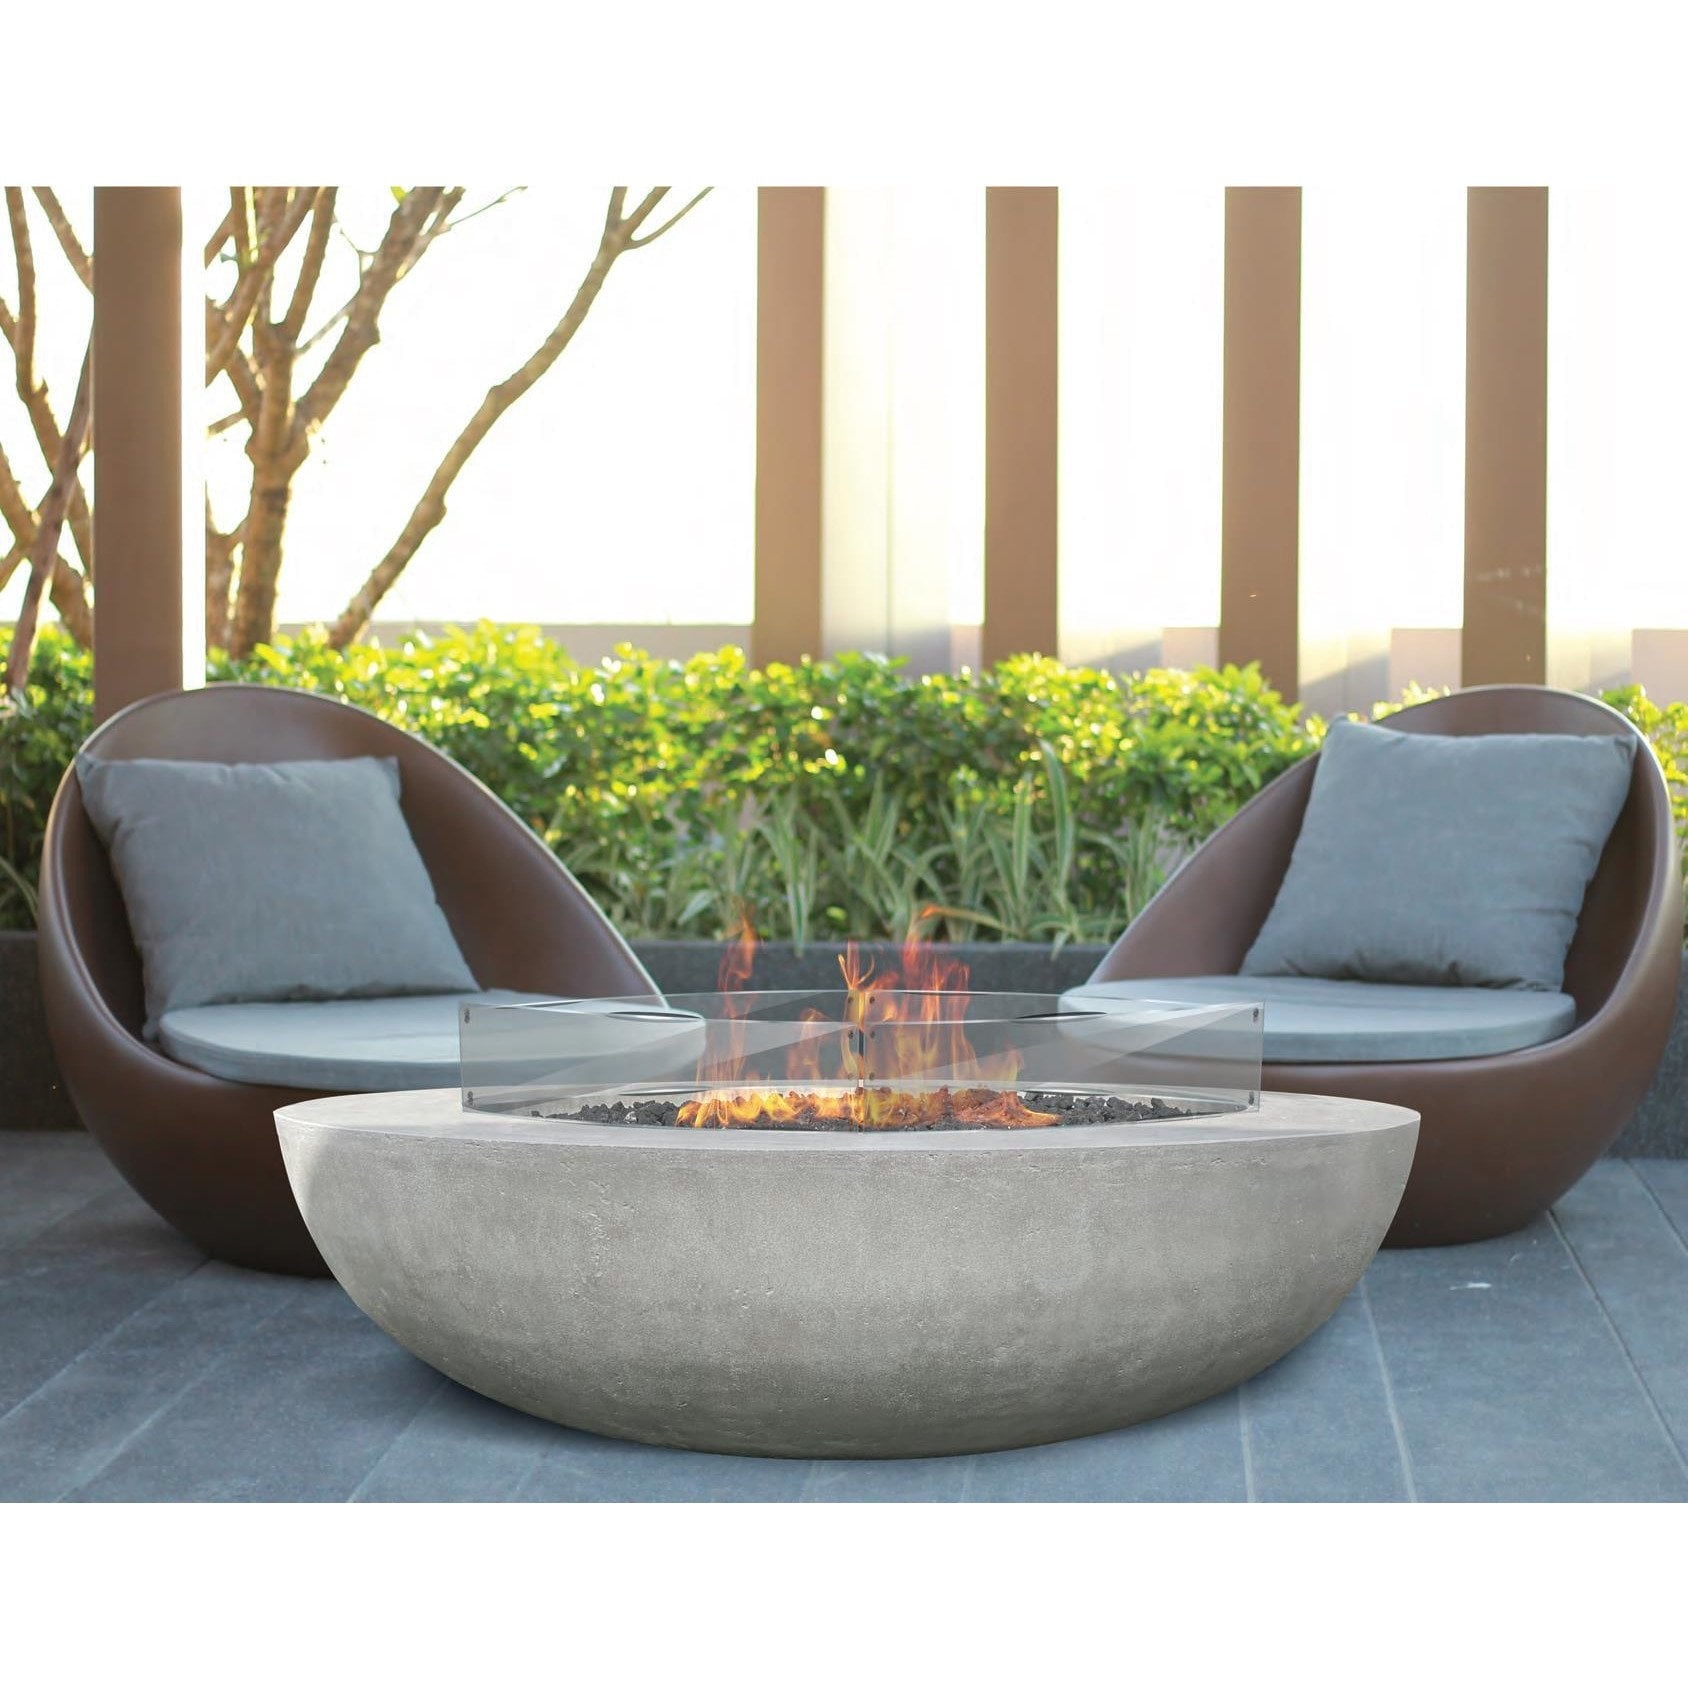 Moderno 70 Fire Pit Table in GFRC Concrete by Prism Hardscapes - Majestic Fountains